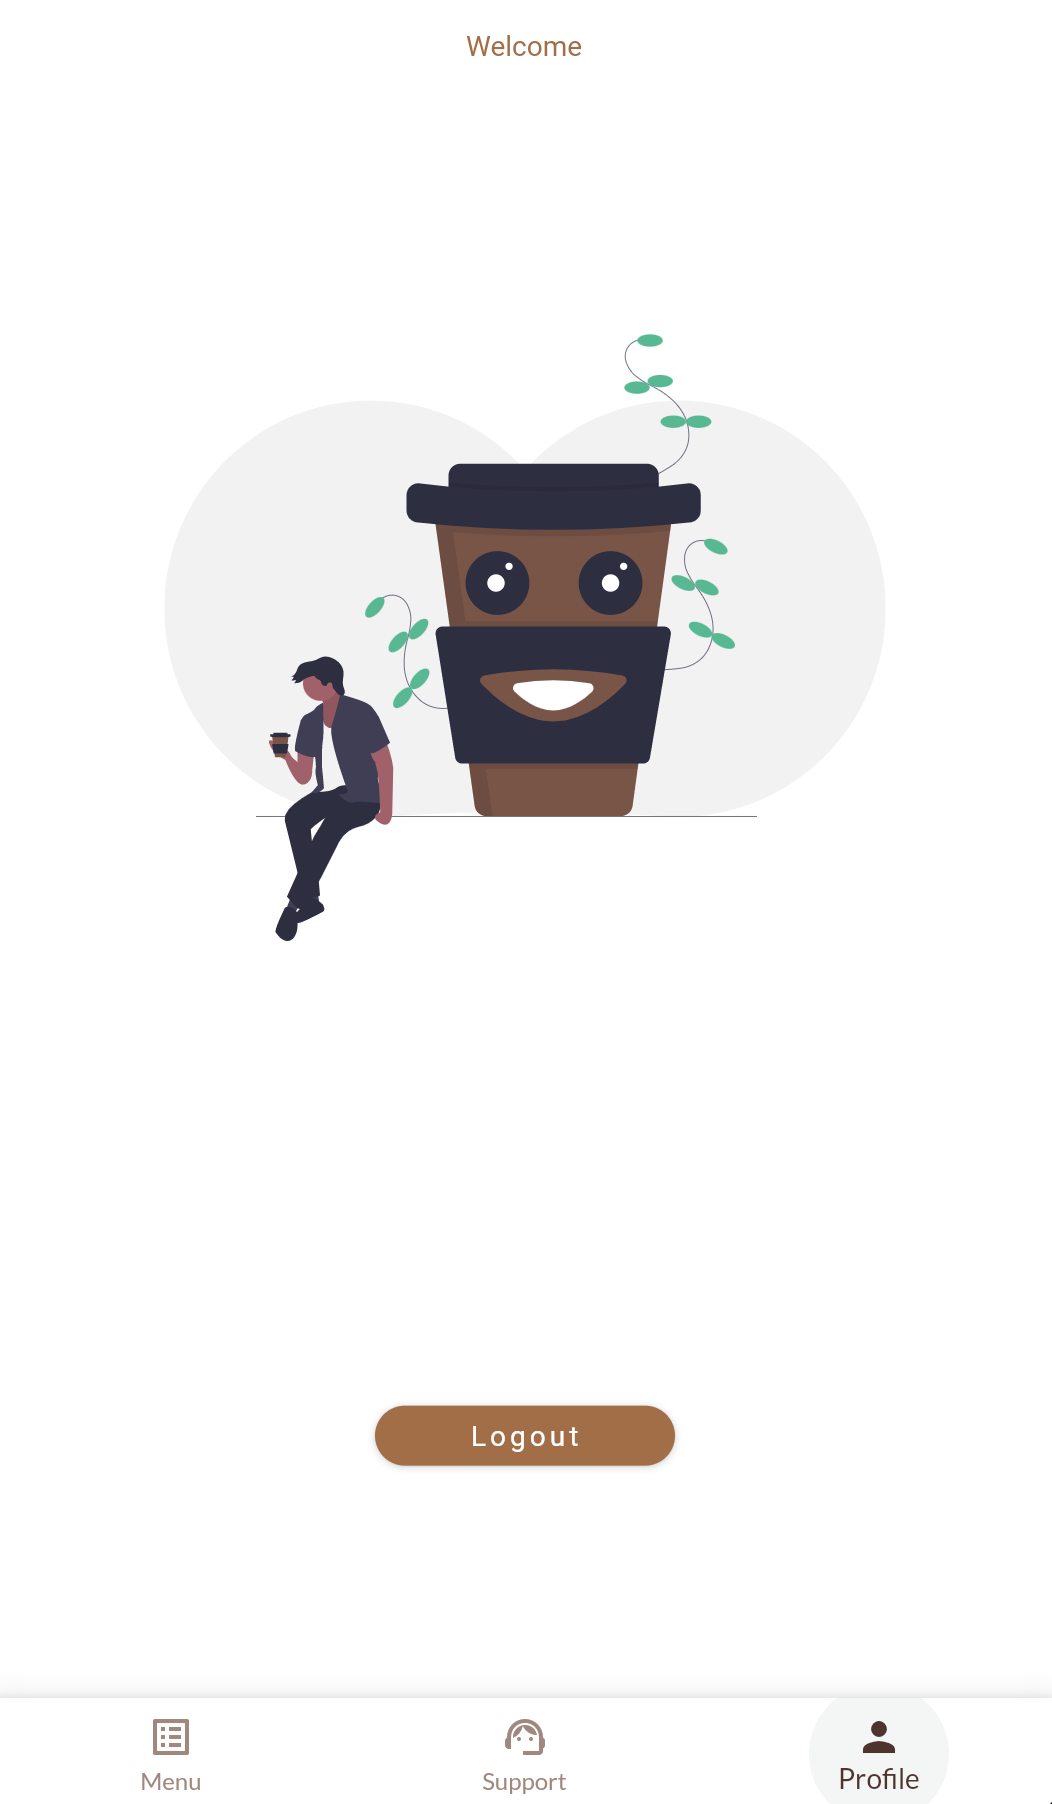 The MJ Coffee App’s “Profile” screen, which currently shows a coffee illustration